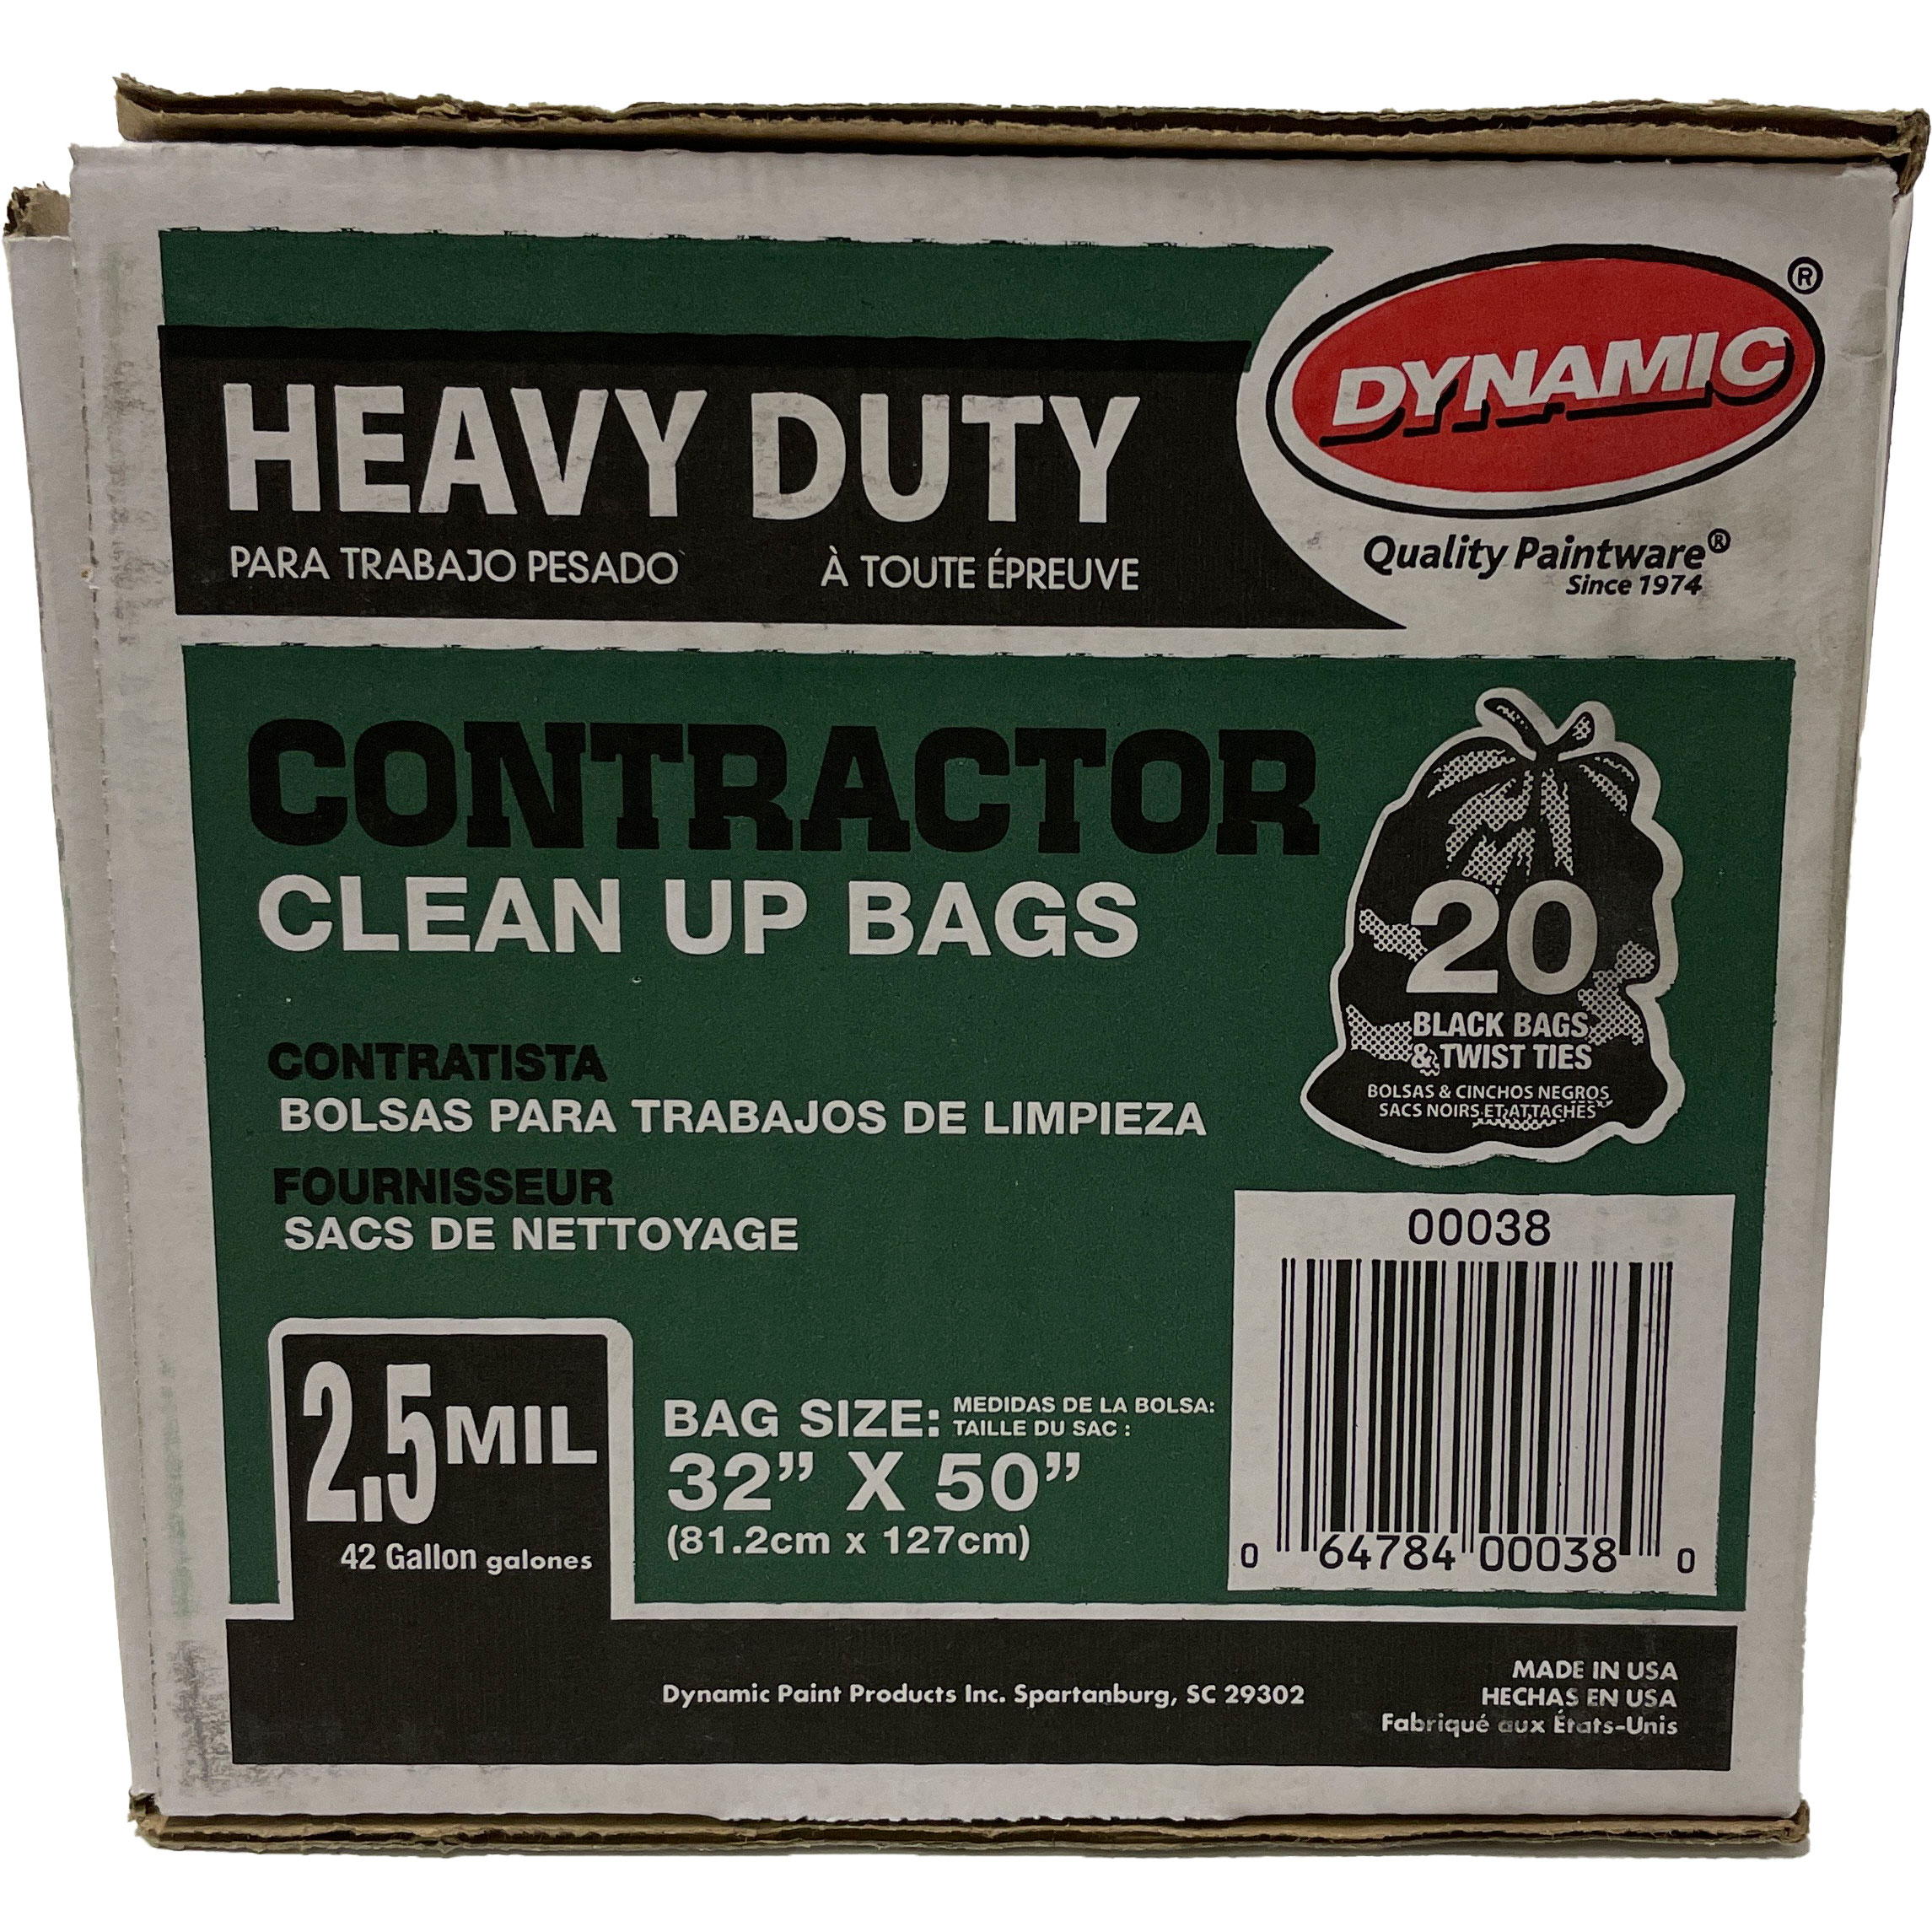 Dynamic 00038 Heavy Duty Black Contractor Bags, 42 Gallon, 2.5mil, 32" x 50", 20 Bags w/ Twist Ties - Click Image to Close